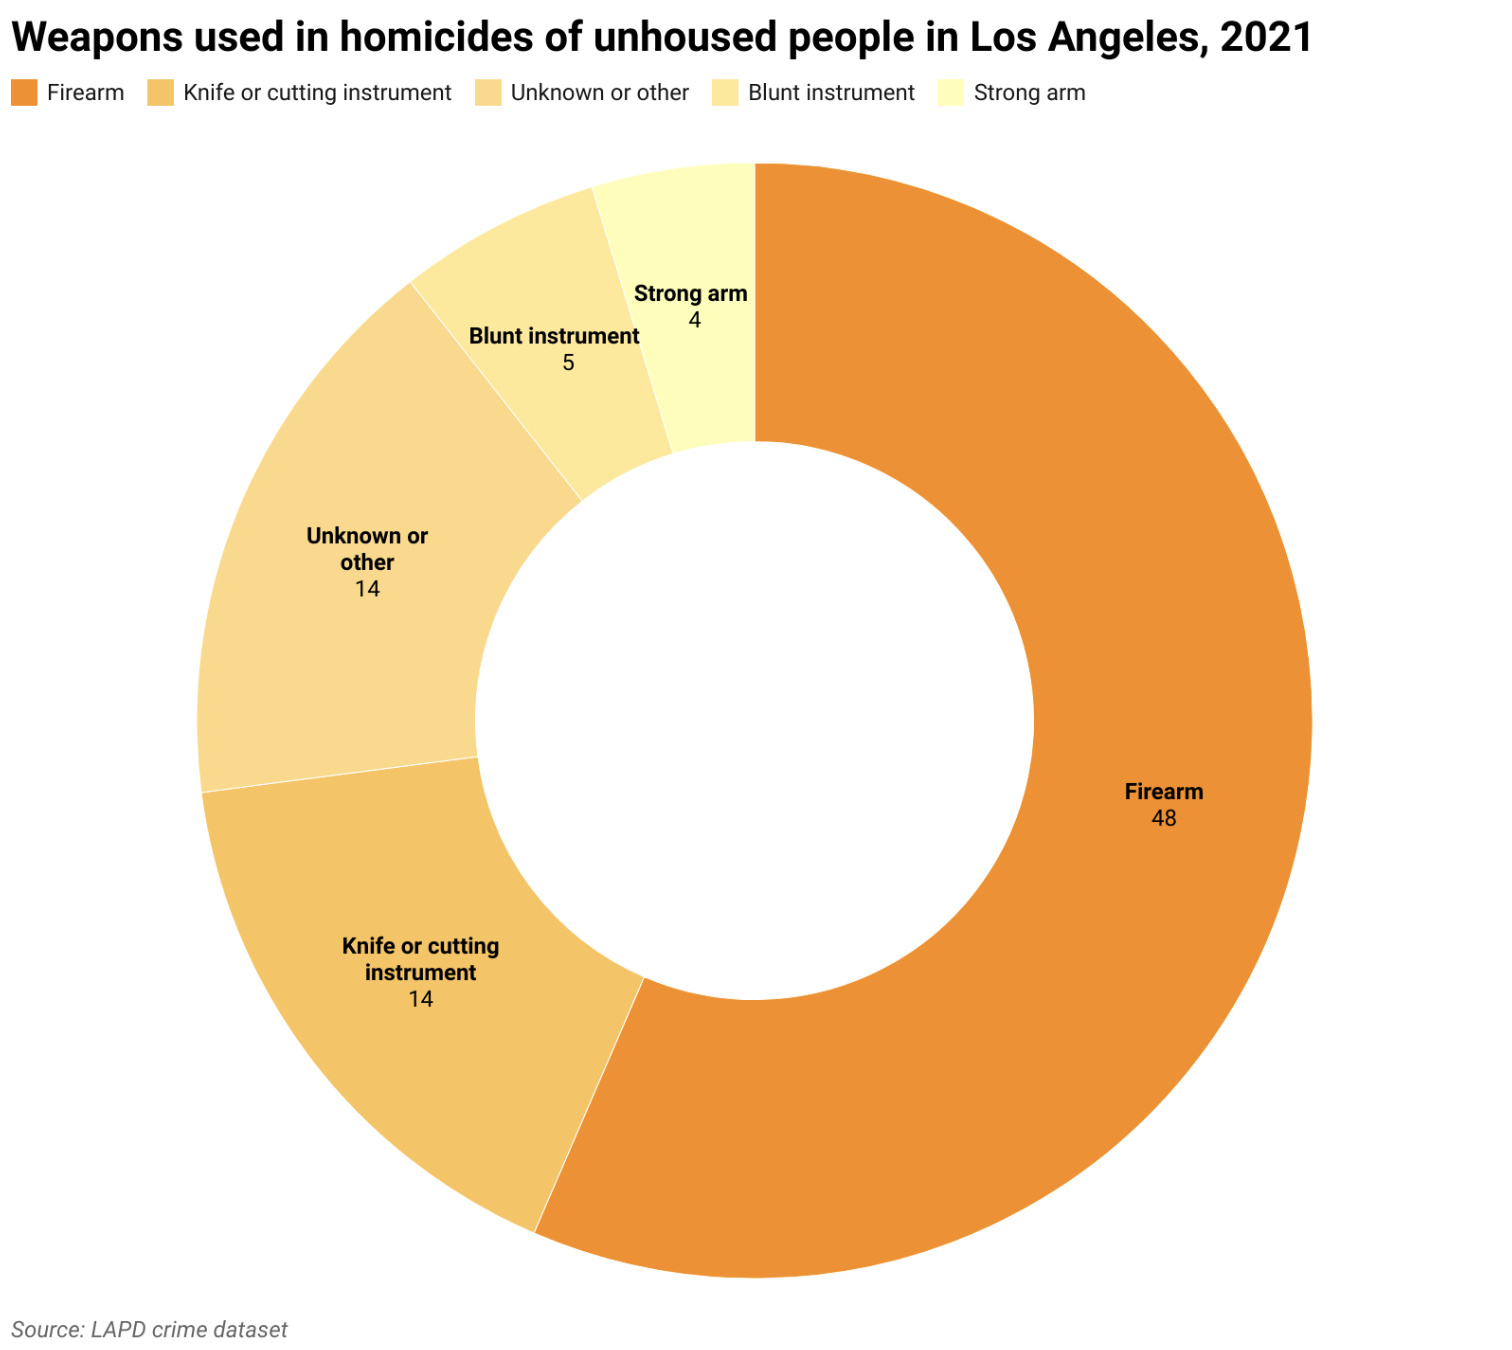 Pie chart of murder weapon used in killings of people experiencing homelessness